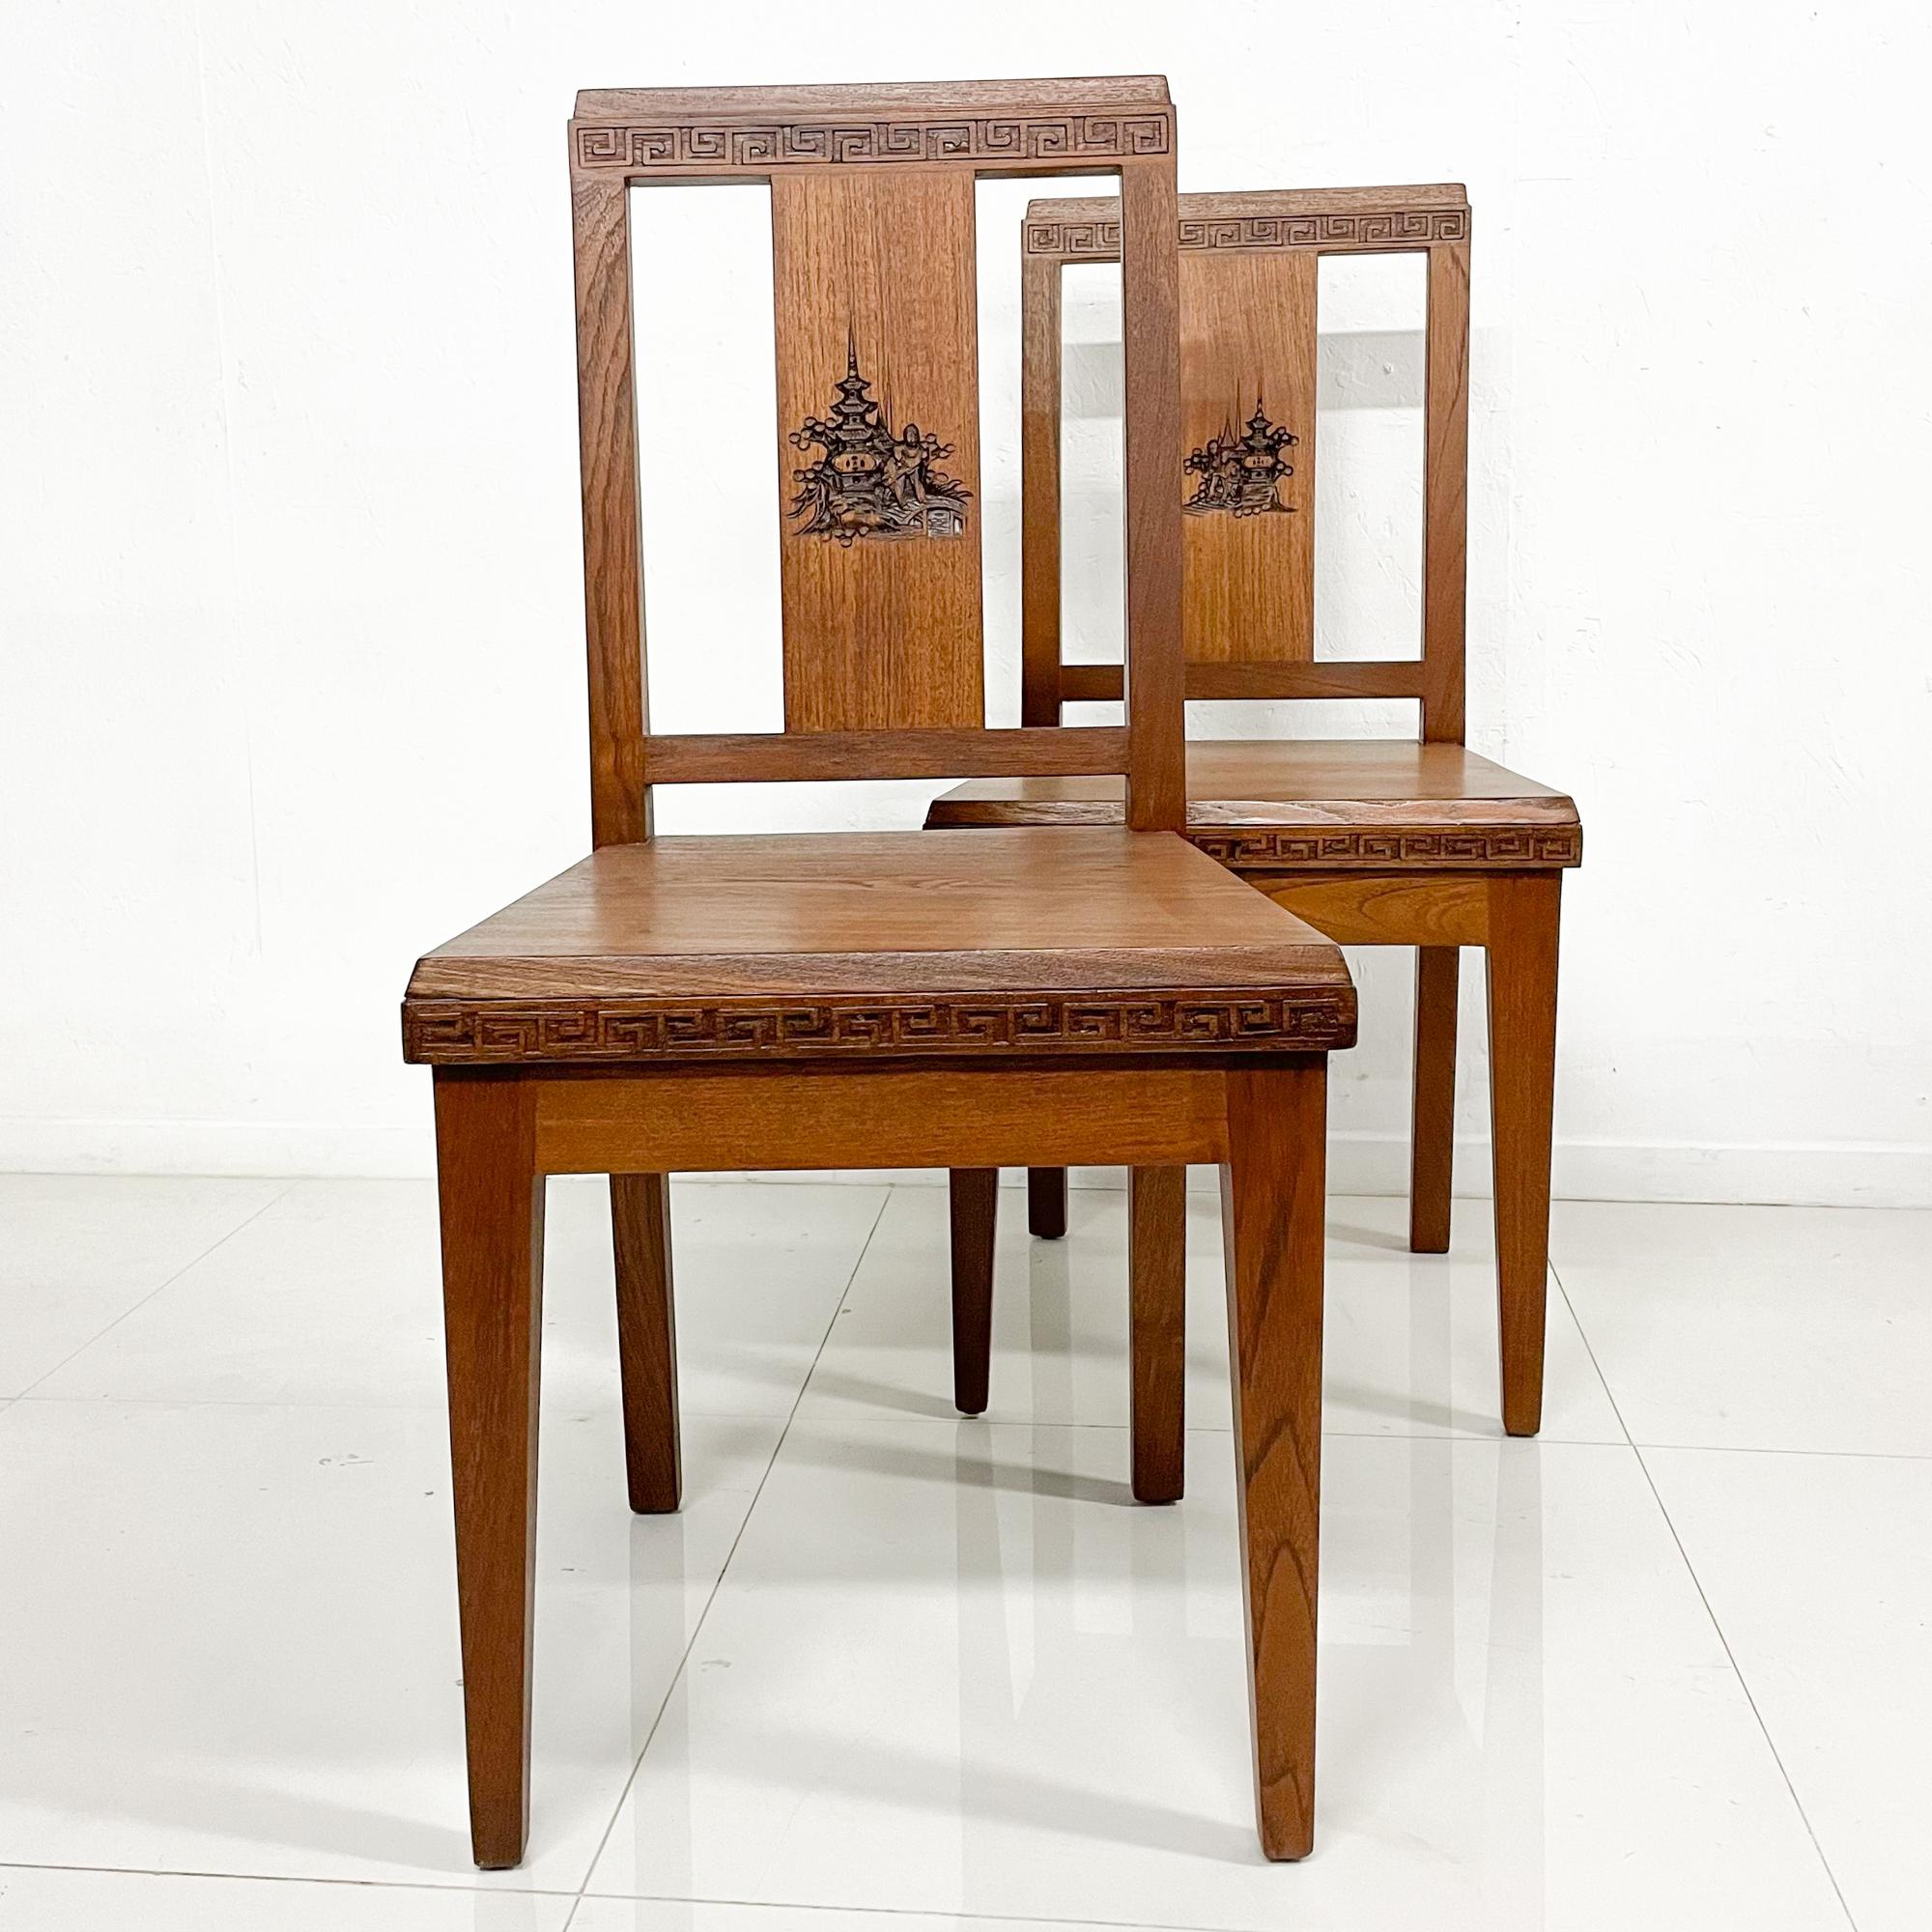 Carved Chairs
Fabulous Collectible Antique Pair of Asian Art Carved Wood Side Chairs made in Hong Kong, 1940s
Original brass label present. Wah On Hung Kee Co 18 Queen's Road East Hong Kong a pioneer company of the wooden furniture industry in Hong